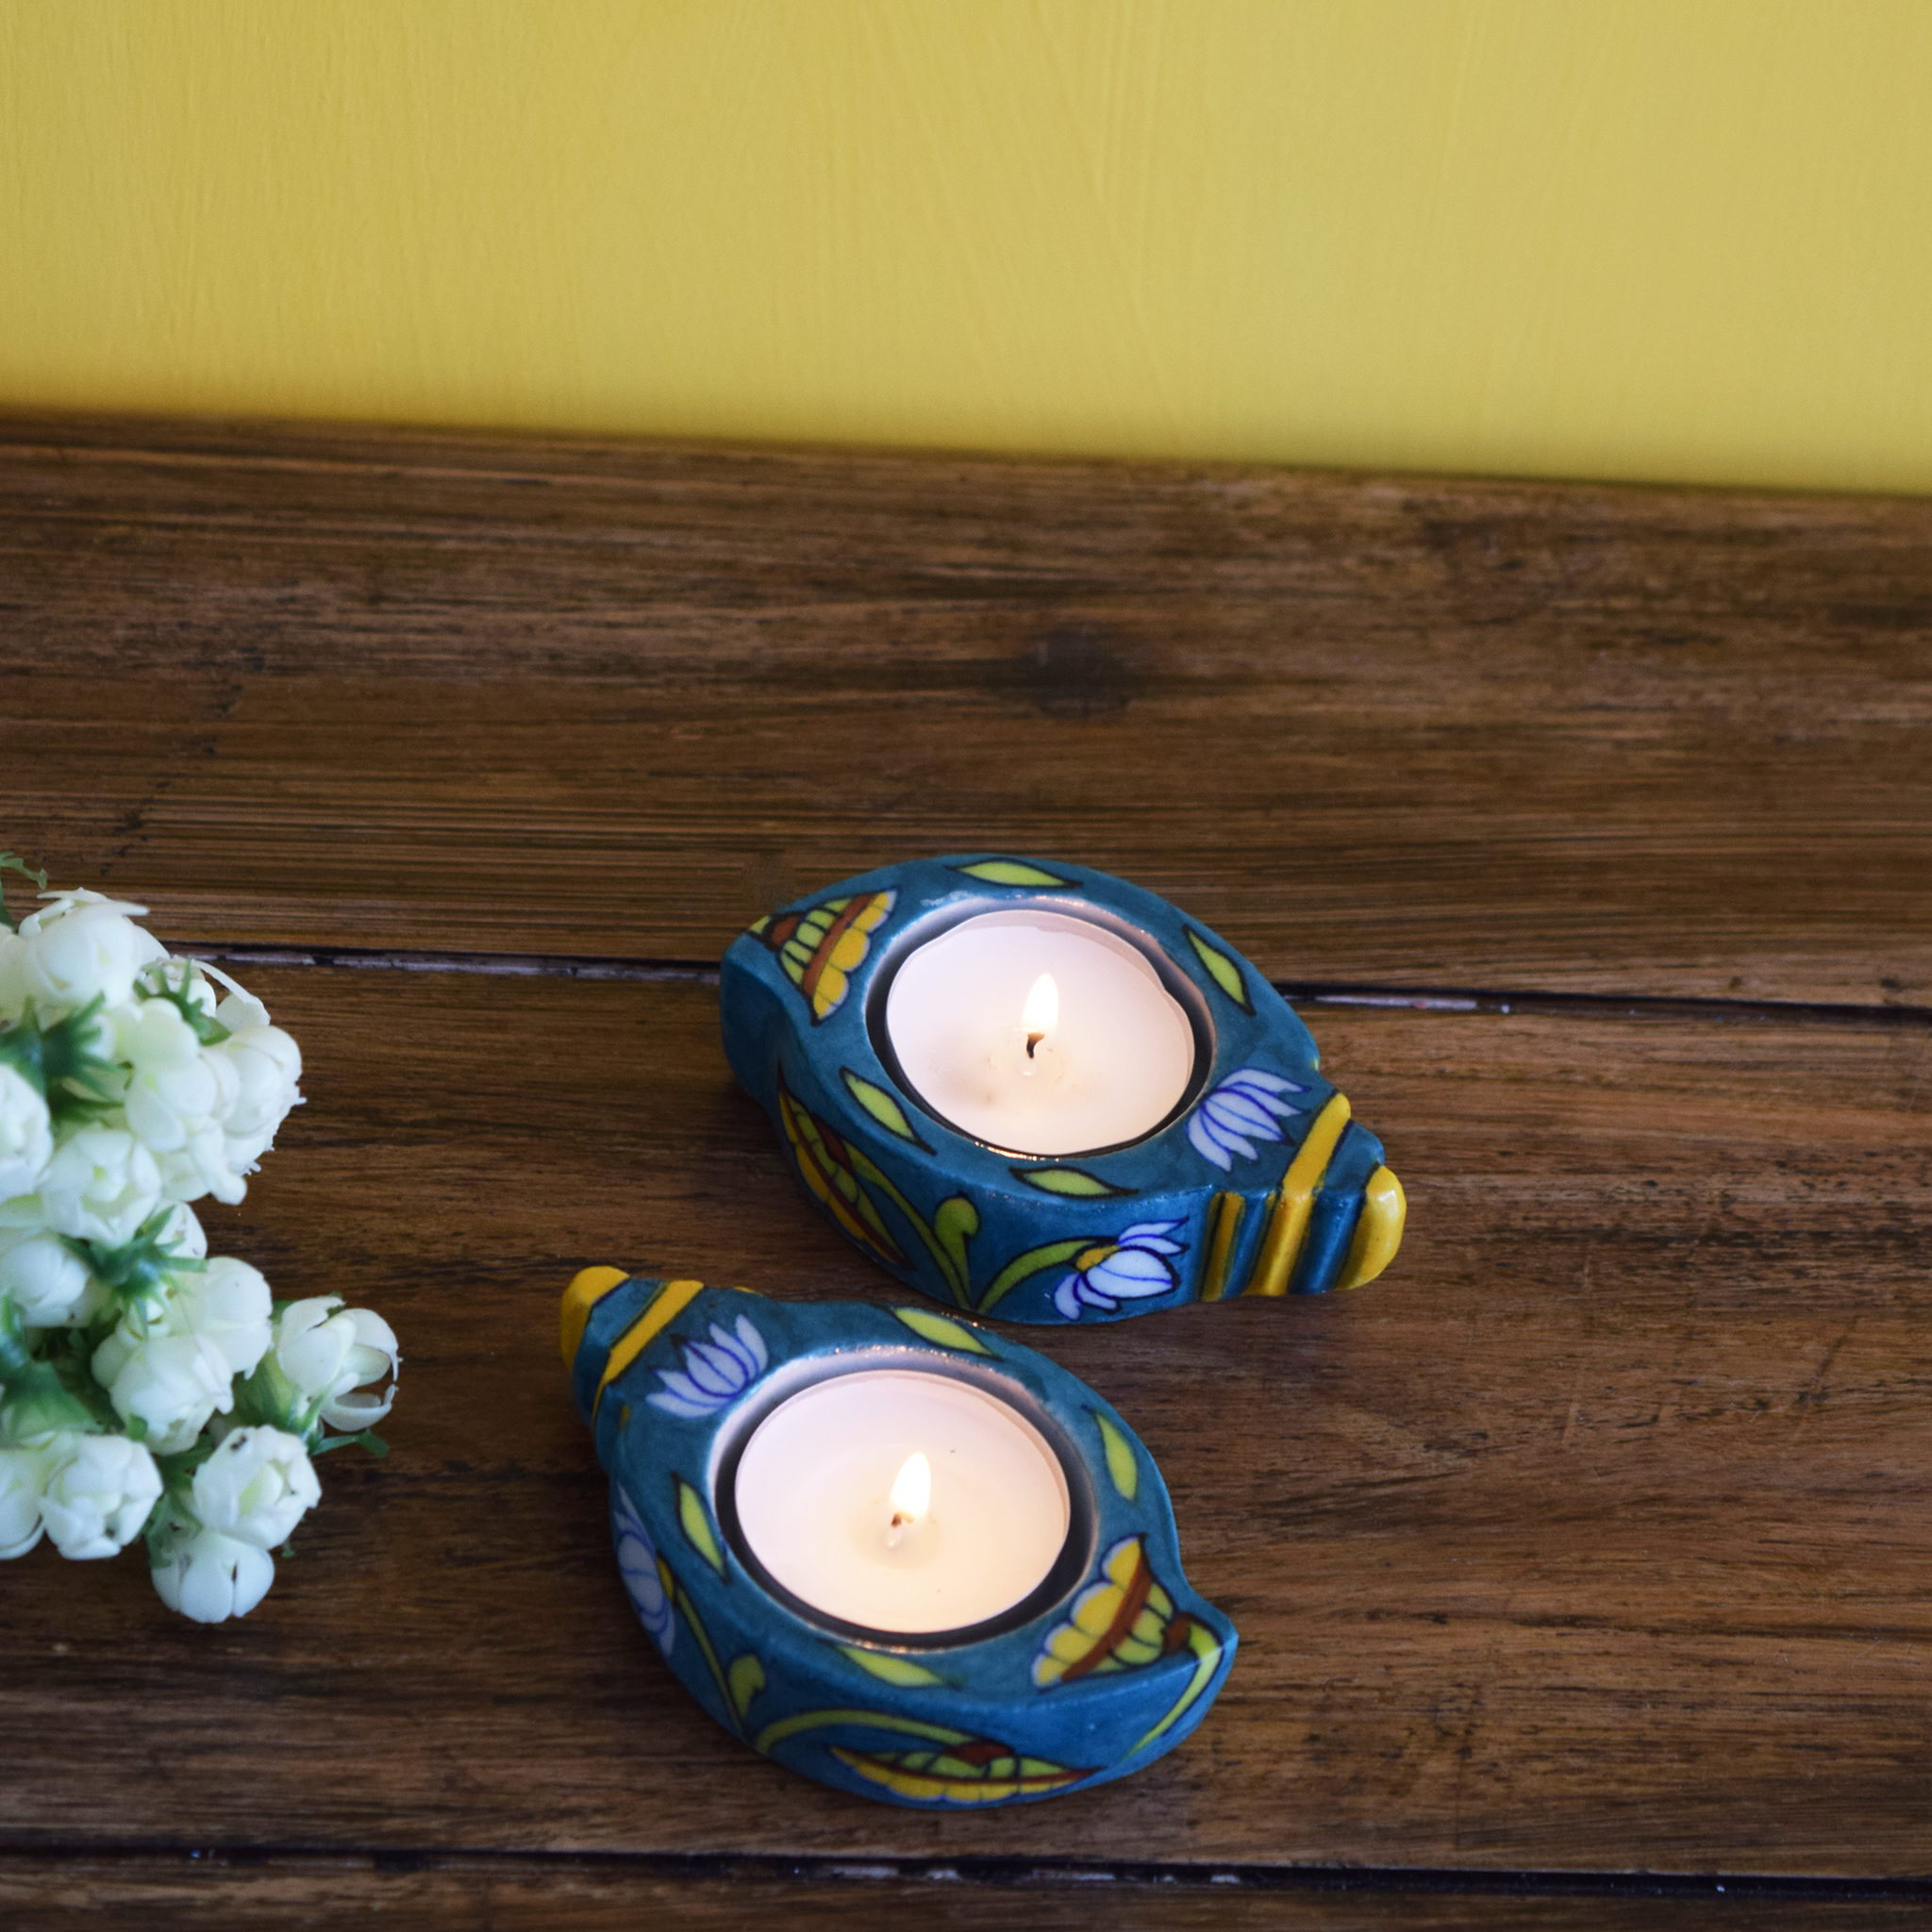  blue conch-shaped tealight holders painted in yellow and brown floral patterns